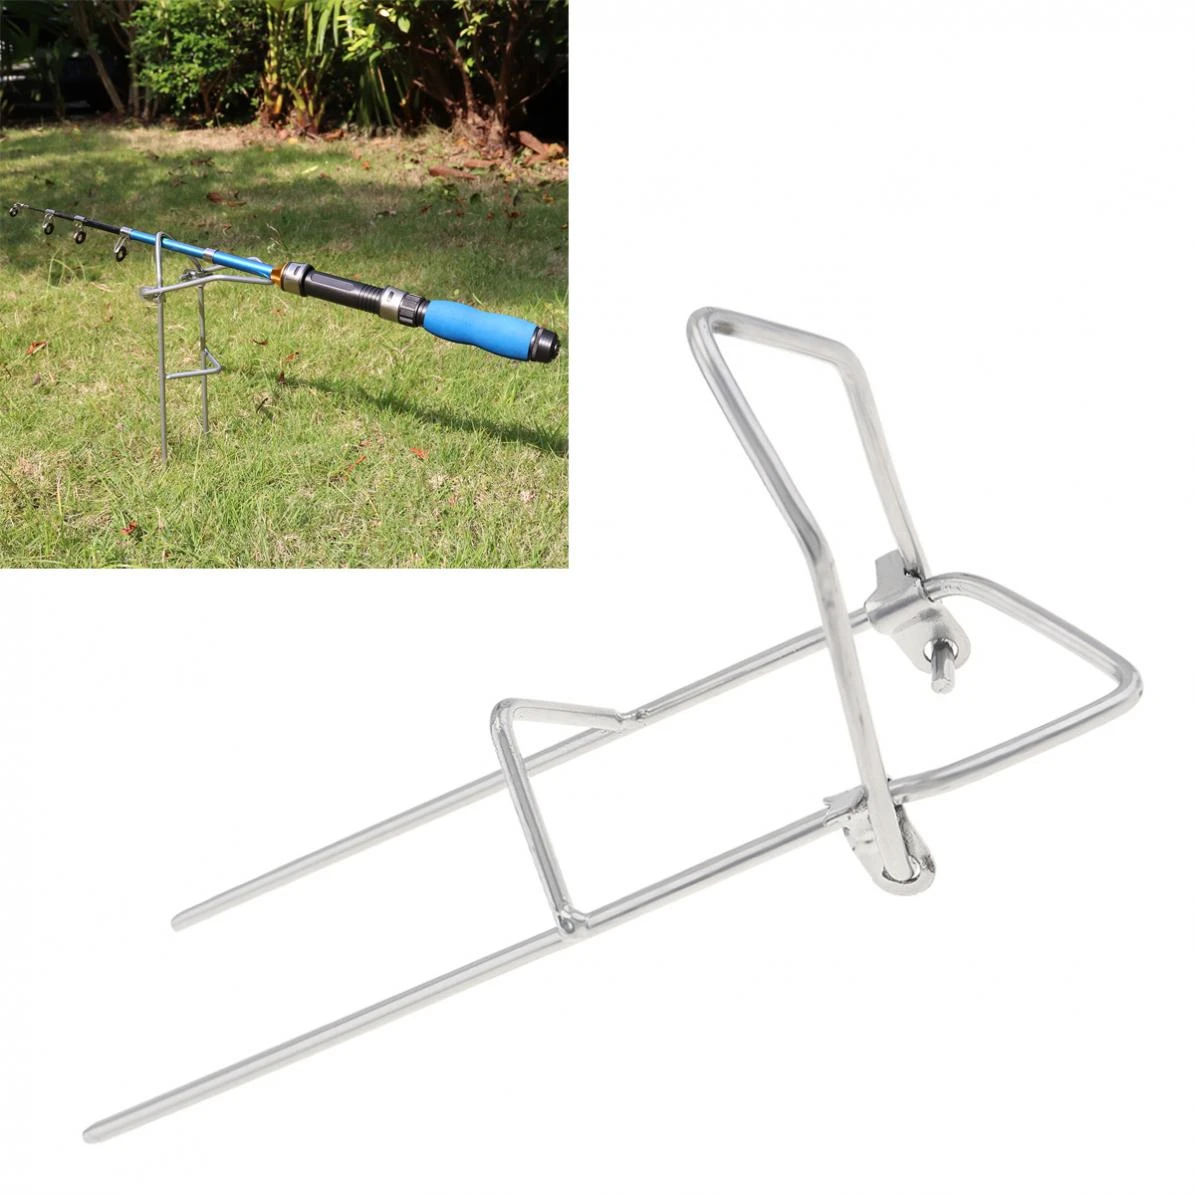 Details about   Metal Fishing Rod Pole Holder Ground Insert Support Stand Rack